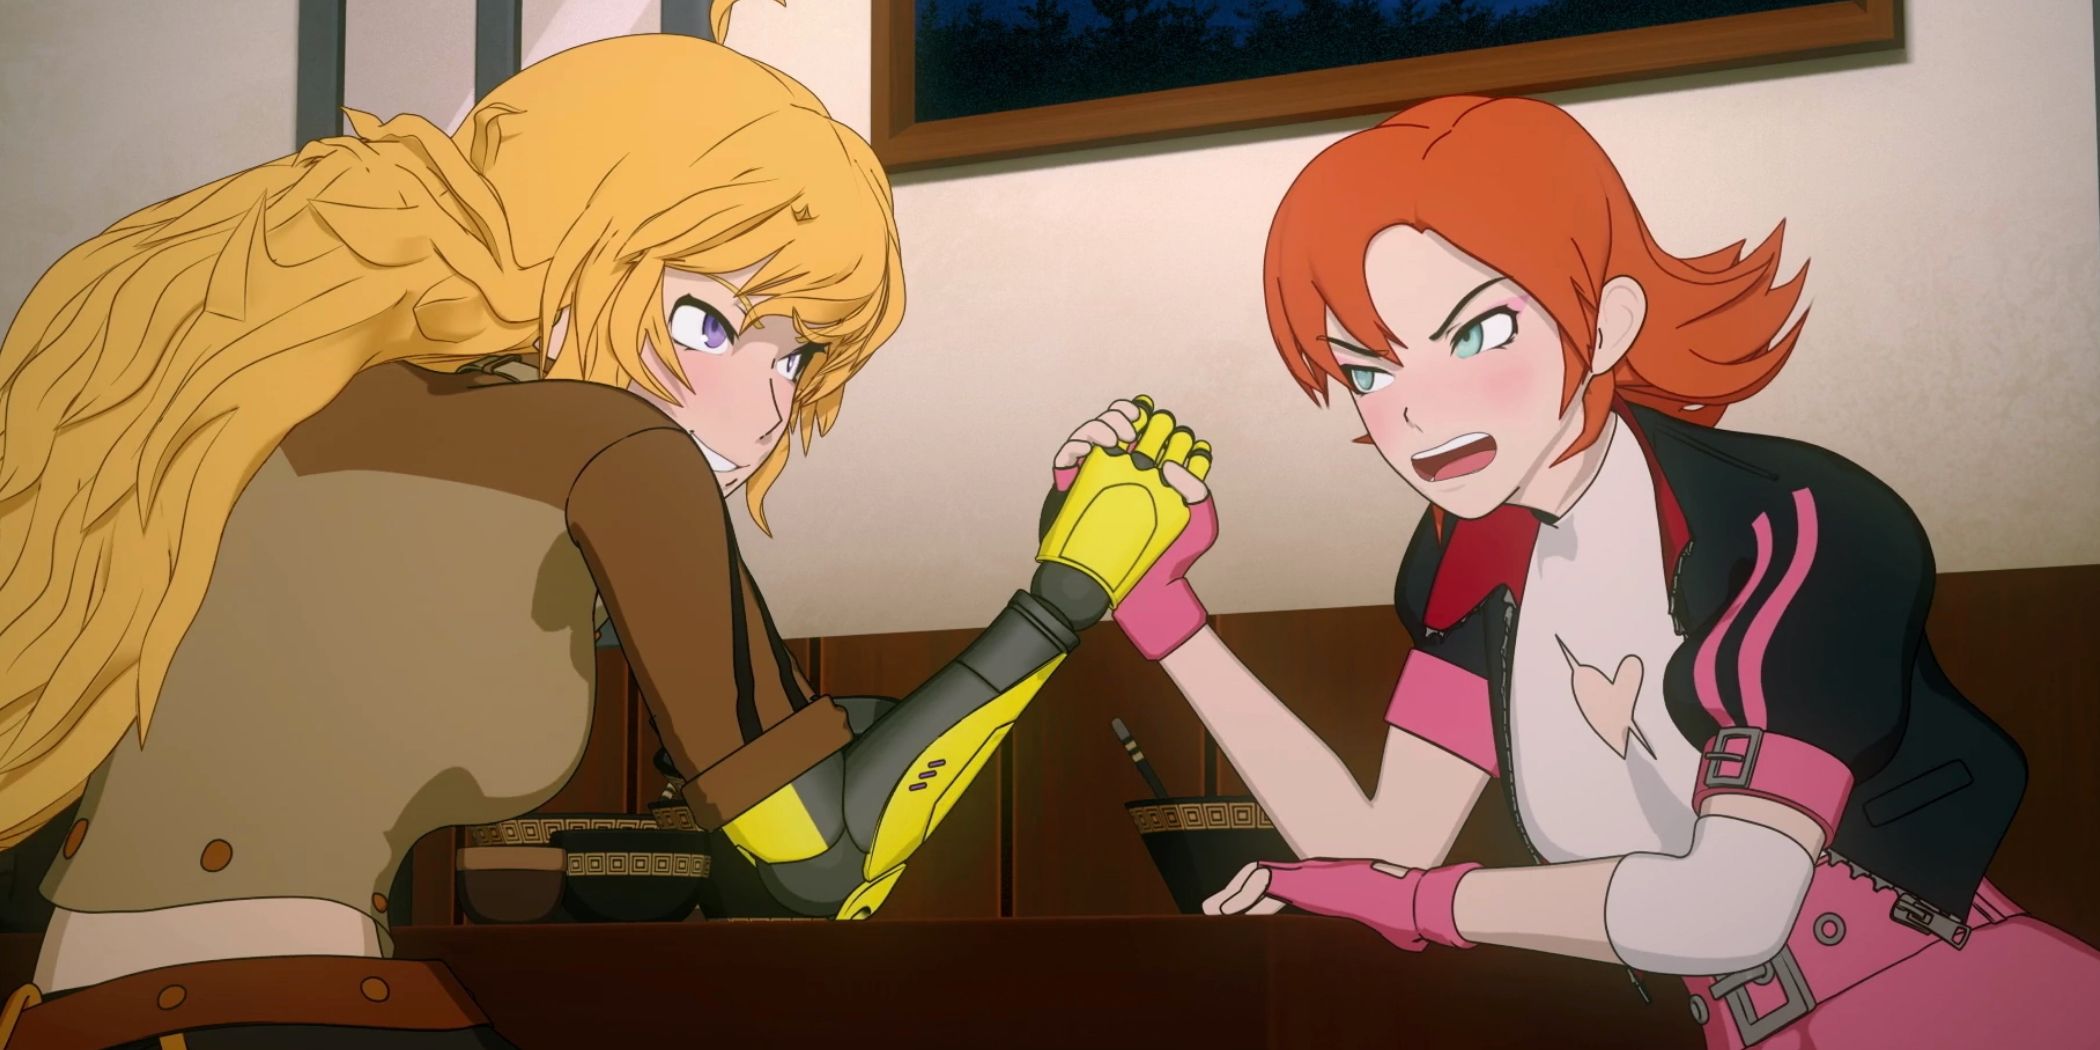 Nora Challenges Yang To An Arm Wrestling Match In RWBY